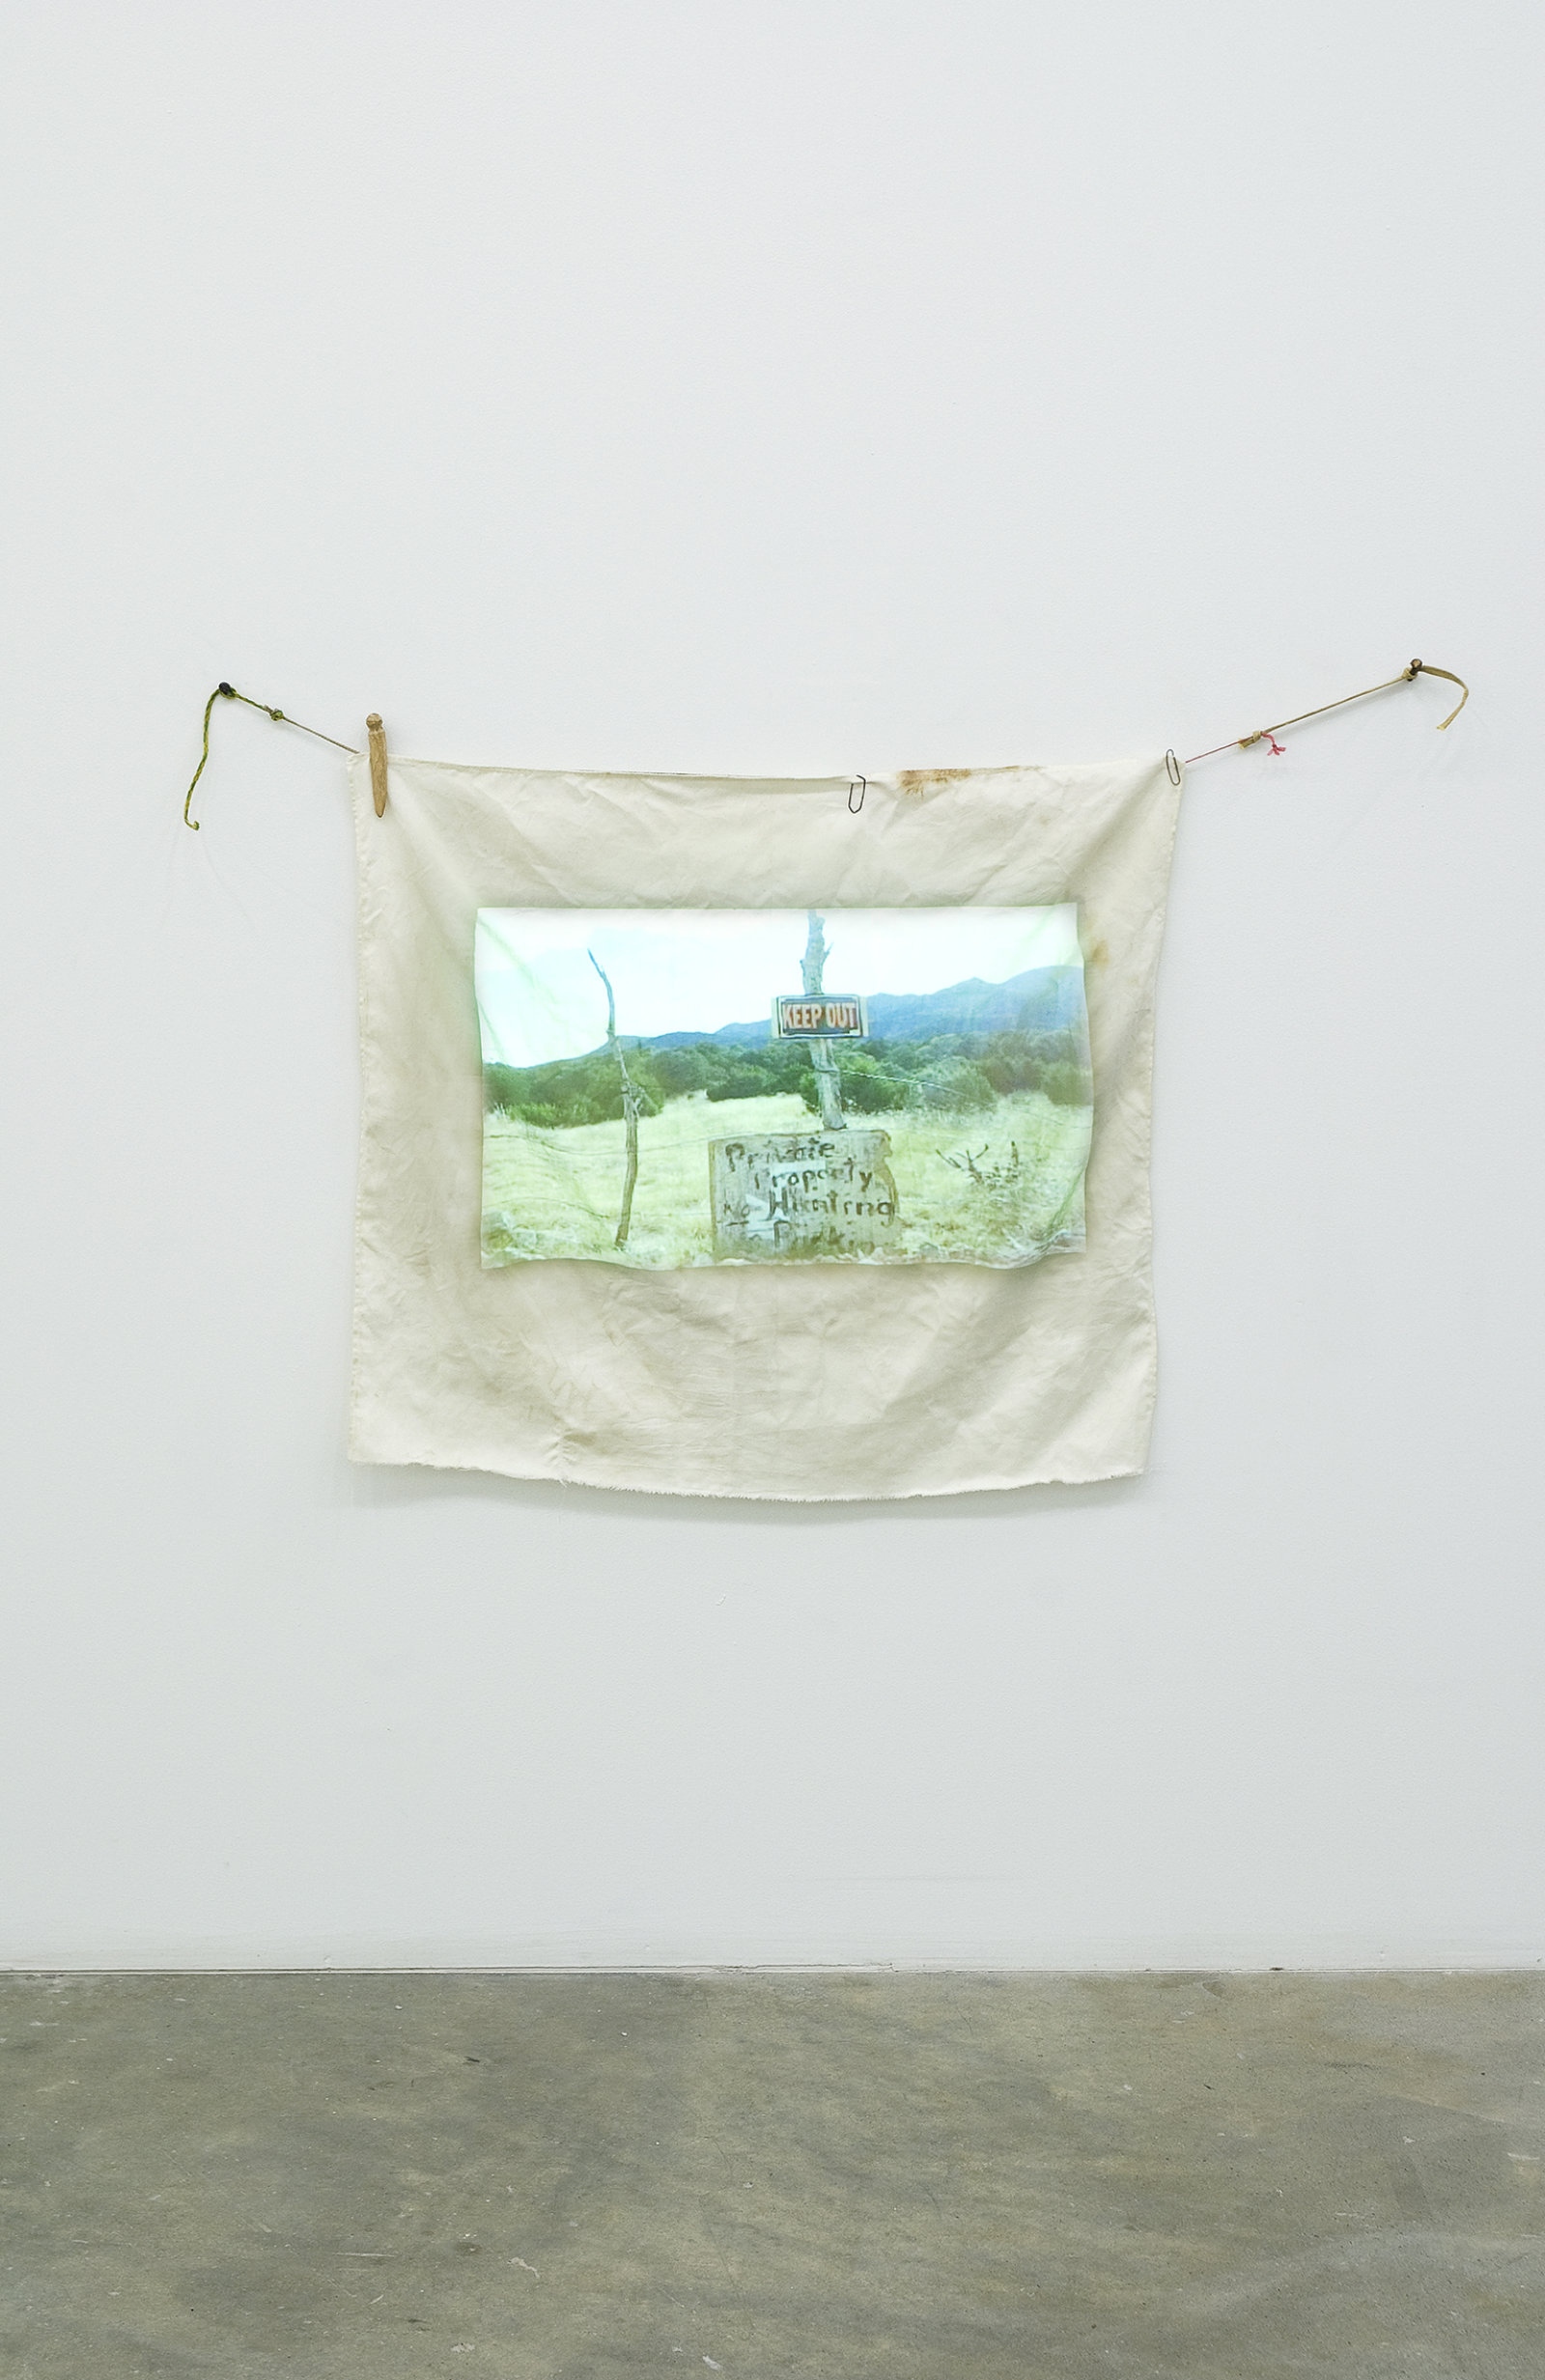 Ashes Withyman, Travel Without Movement from Uncertain Pilgrimage, 2006–2007, dvd projection, cloth projection screen, clothespins, paperclips, string, 32 x 41 in. (80 x 105 cm), 12 minutes, 10 seconds